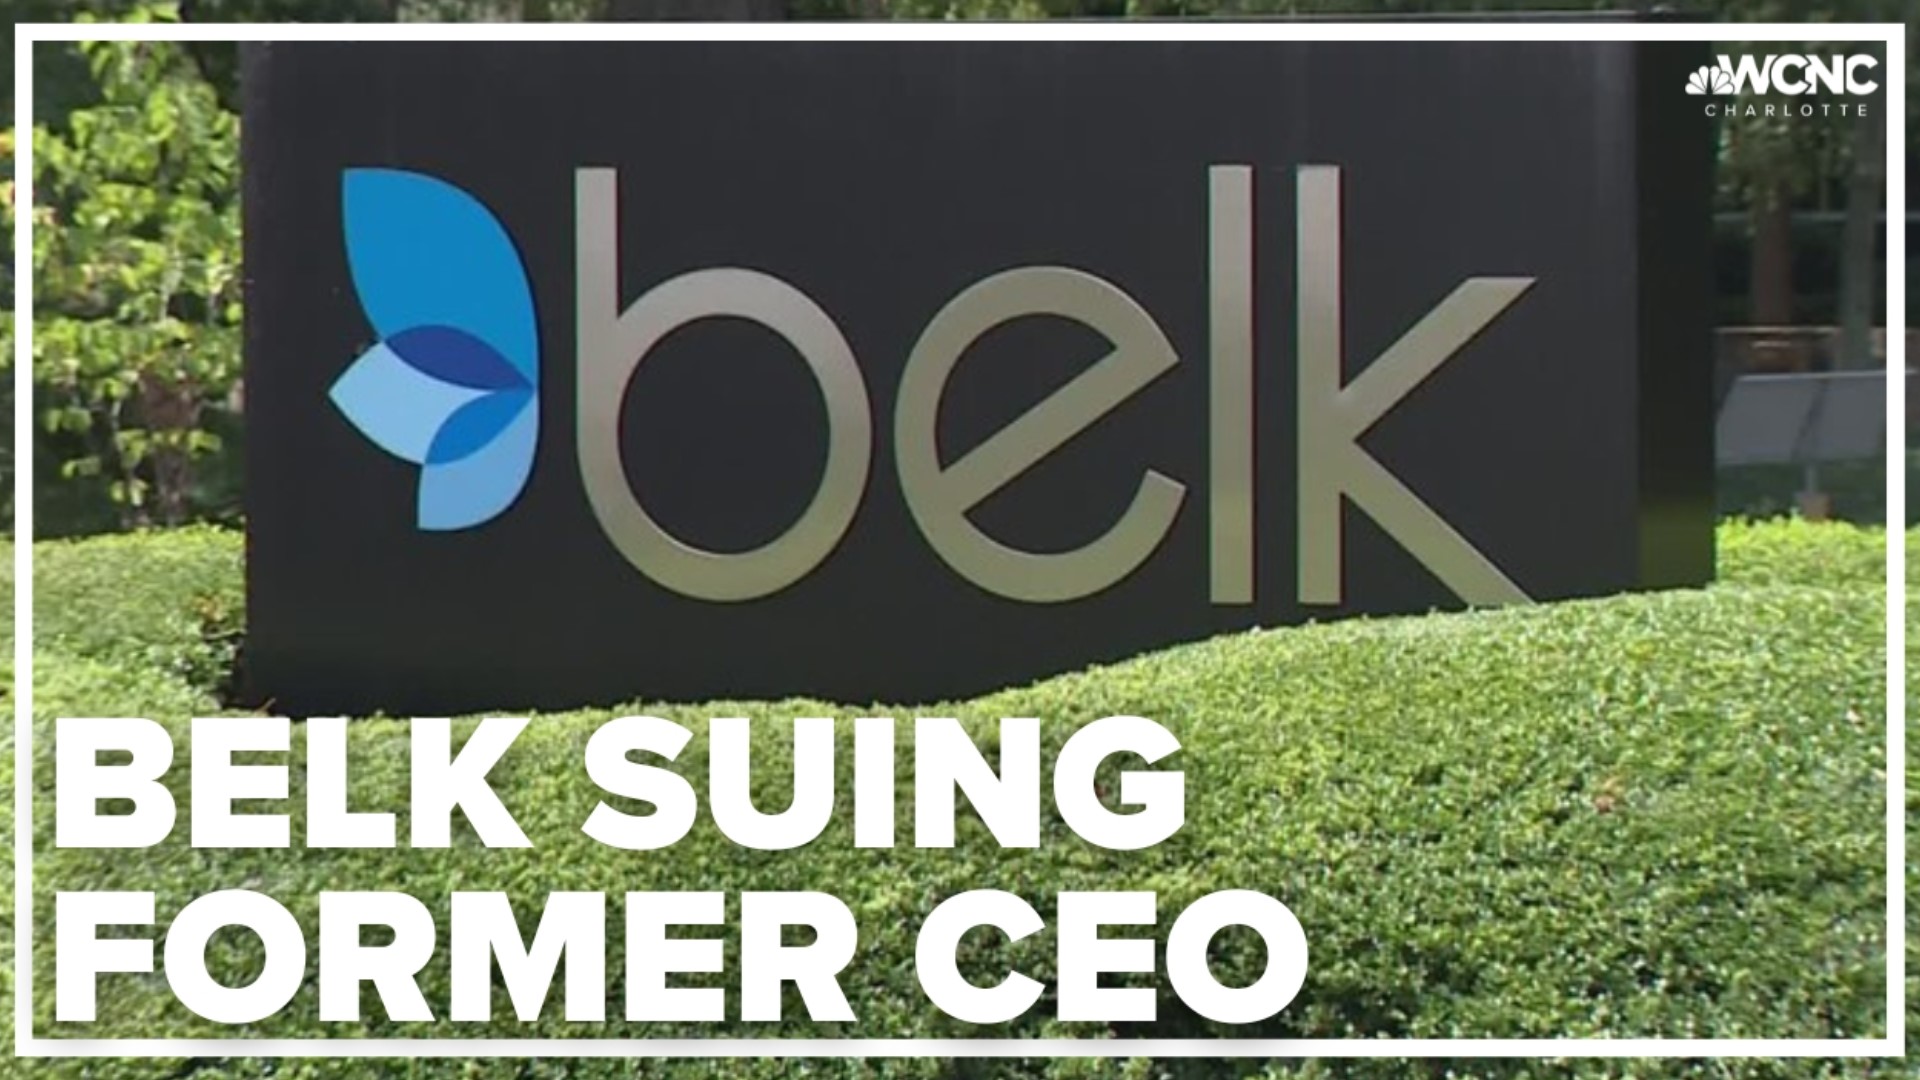 Nir Patel left his position as Belk's CEO in May to become the COO of GameStop. His former employer is now accusing him of violating a nonsolicitation agreement.